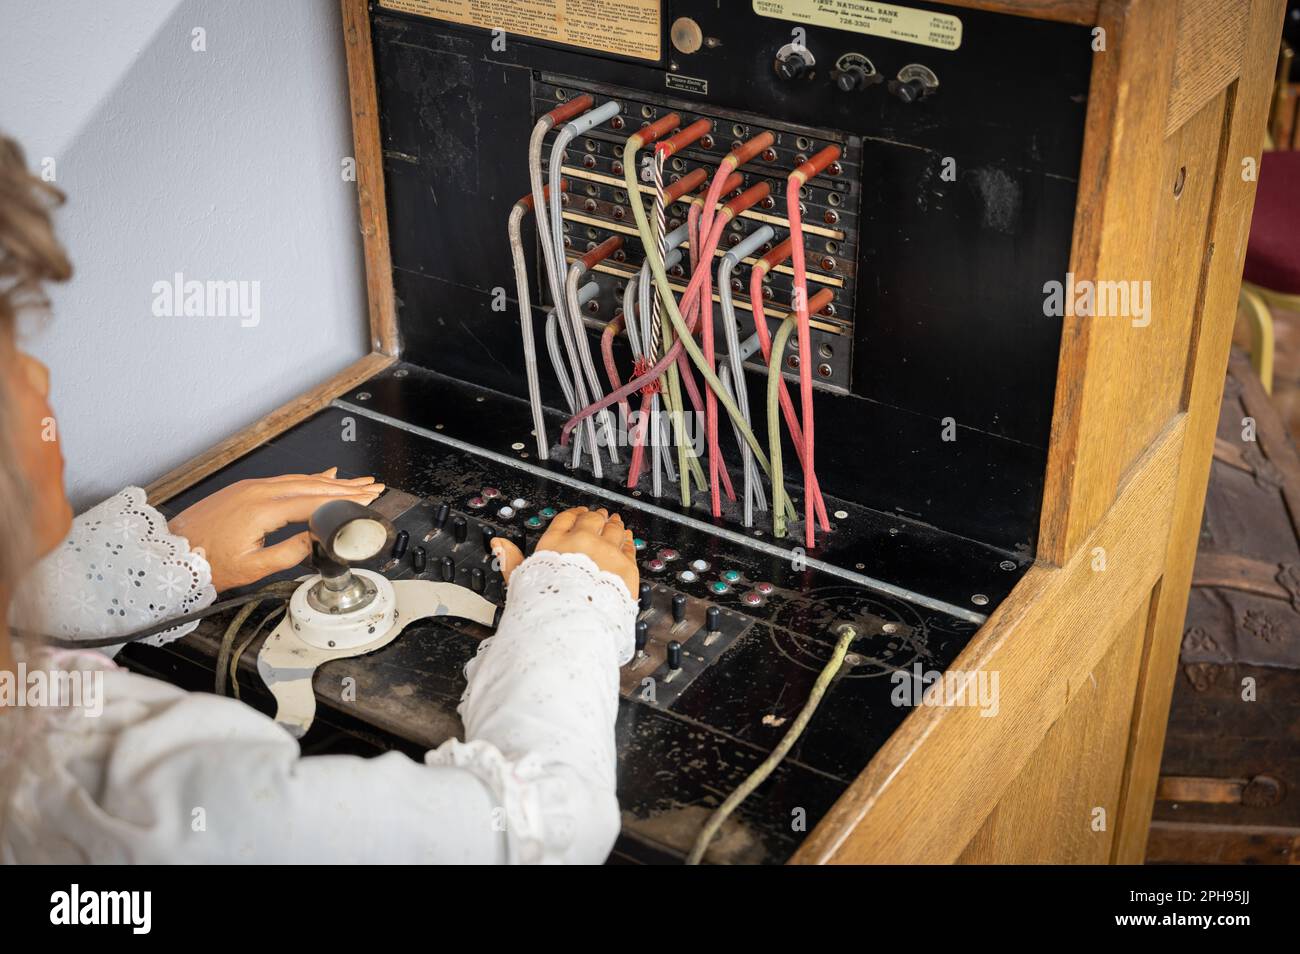 An antique telephone switchboard with multiple cords, buttons, and input ports Stock Photo